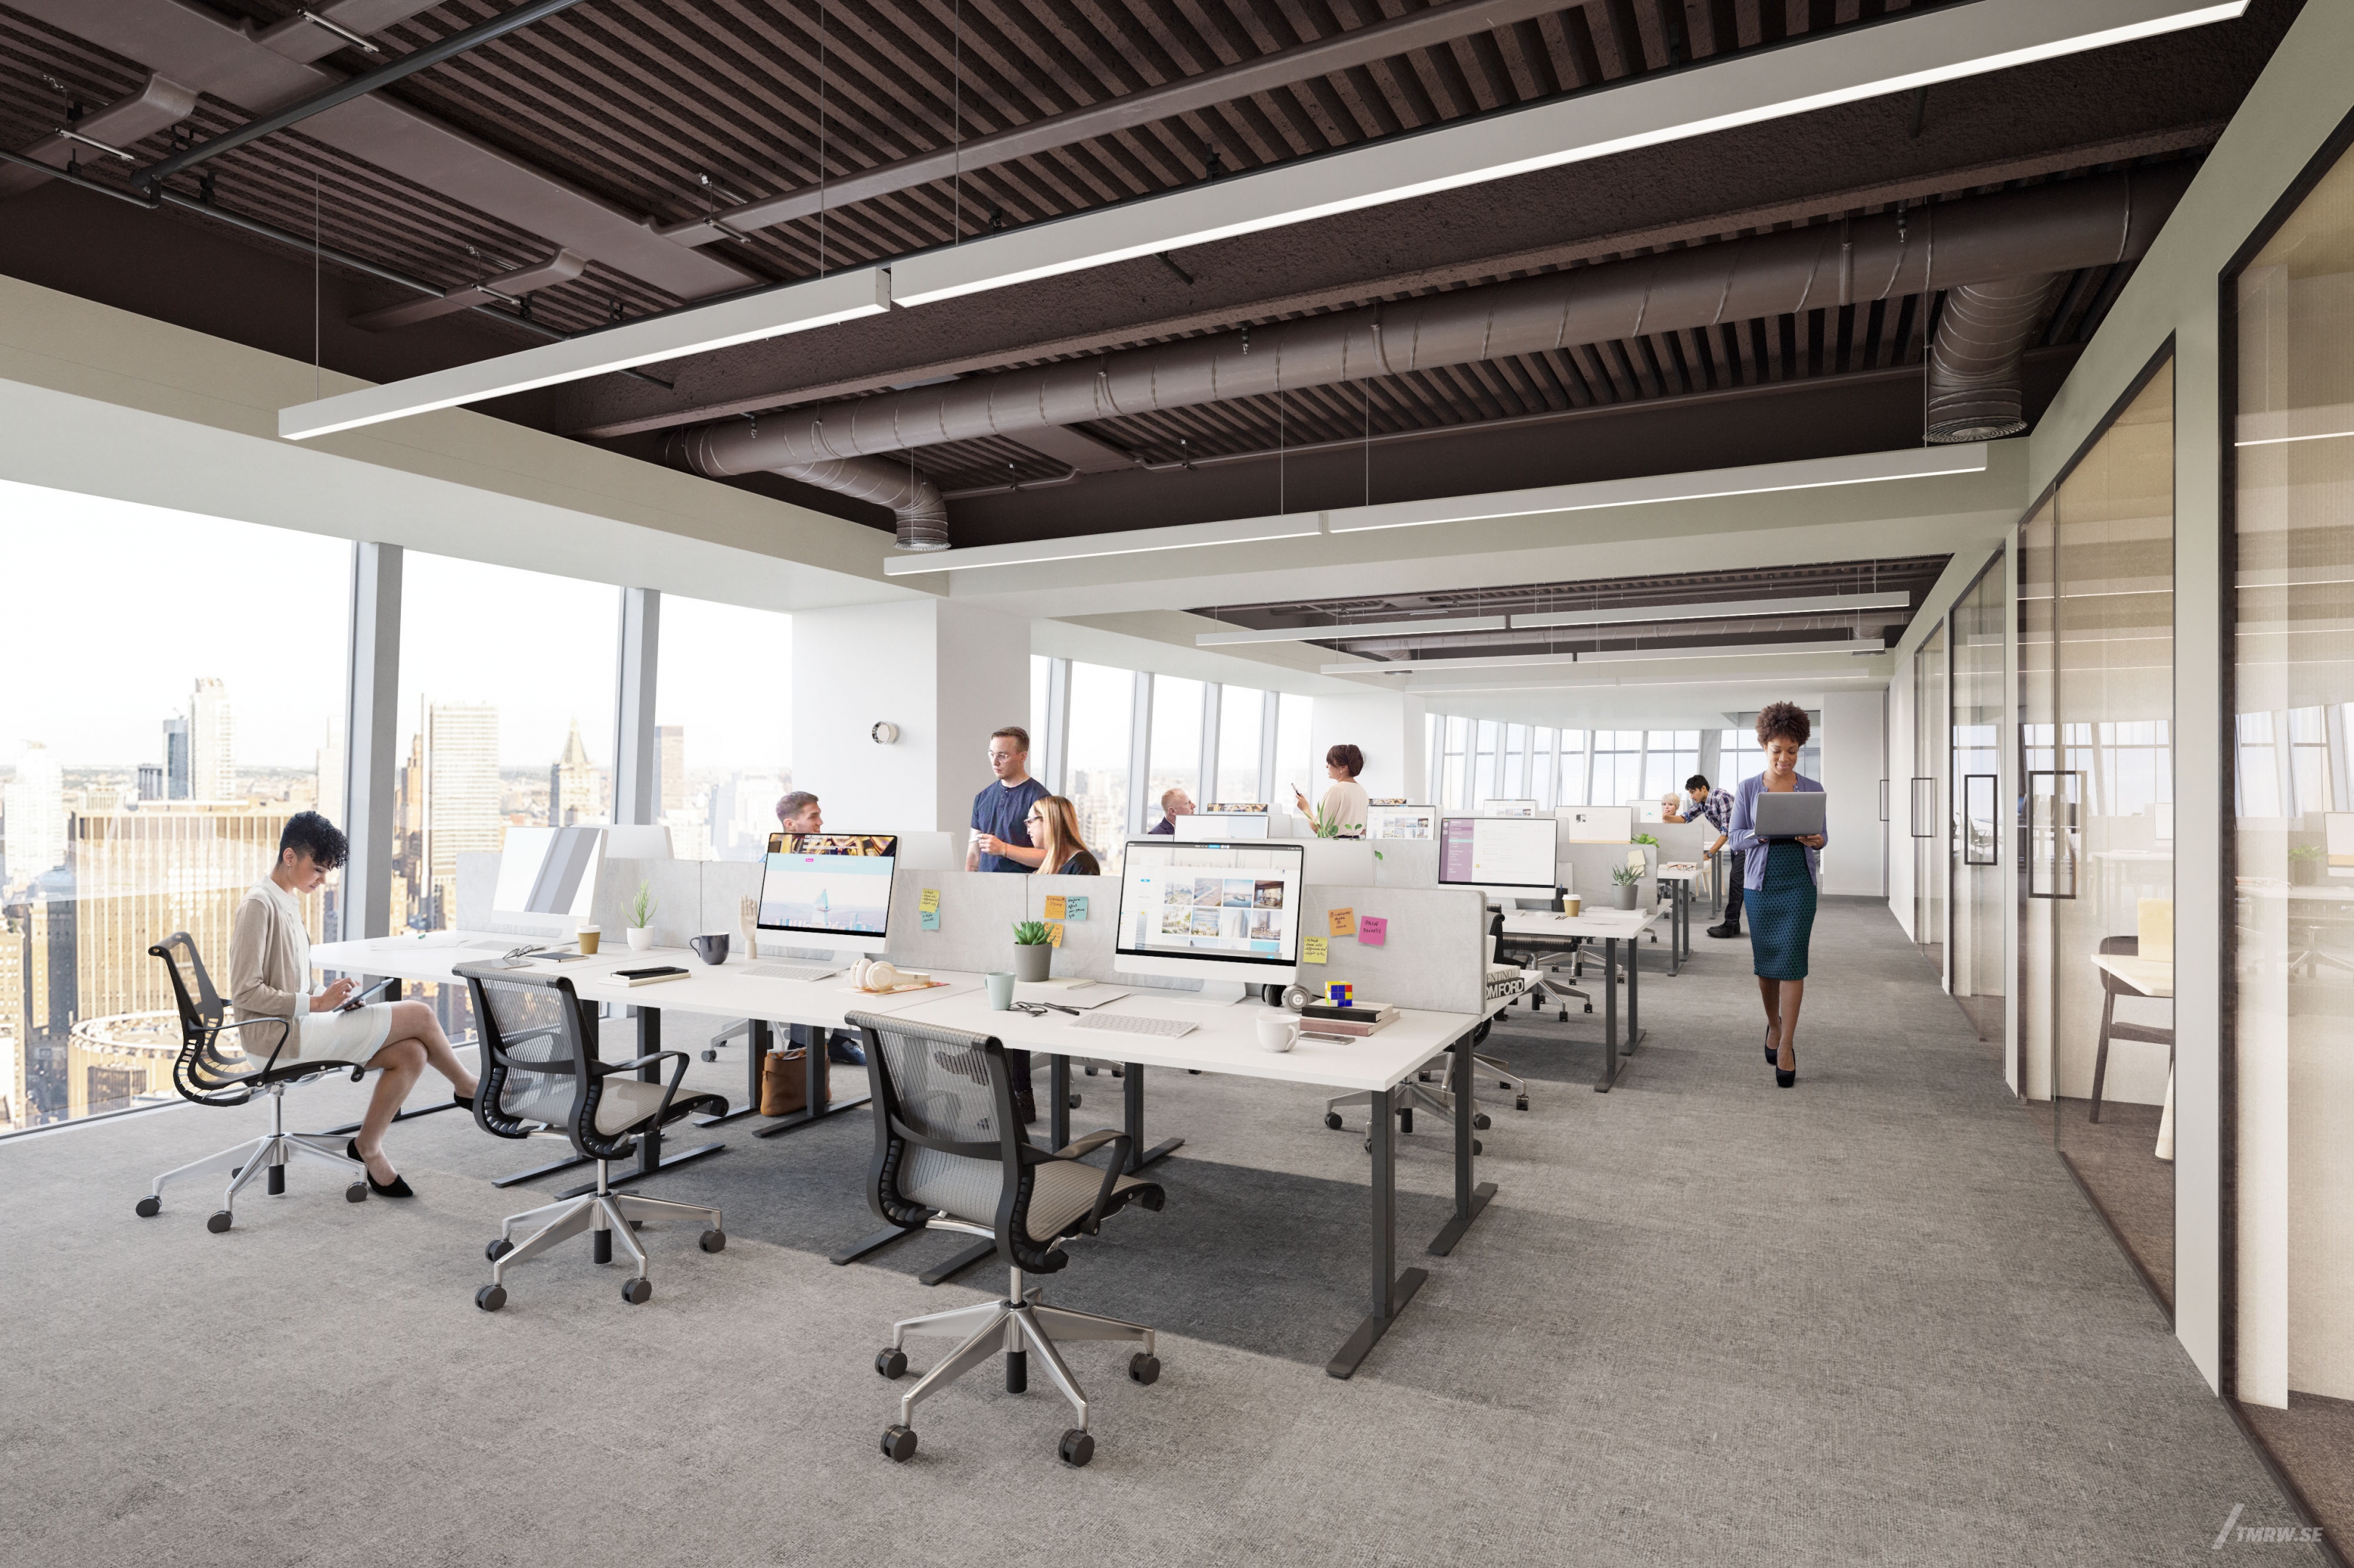 Architectural visualization of OMW for Brookfield Properties. An image of the interior of a office with people sitting by desks in daylight.